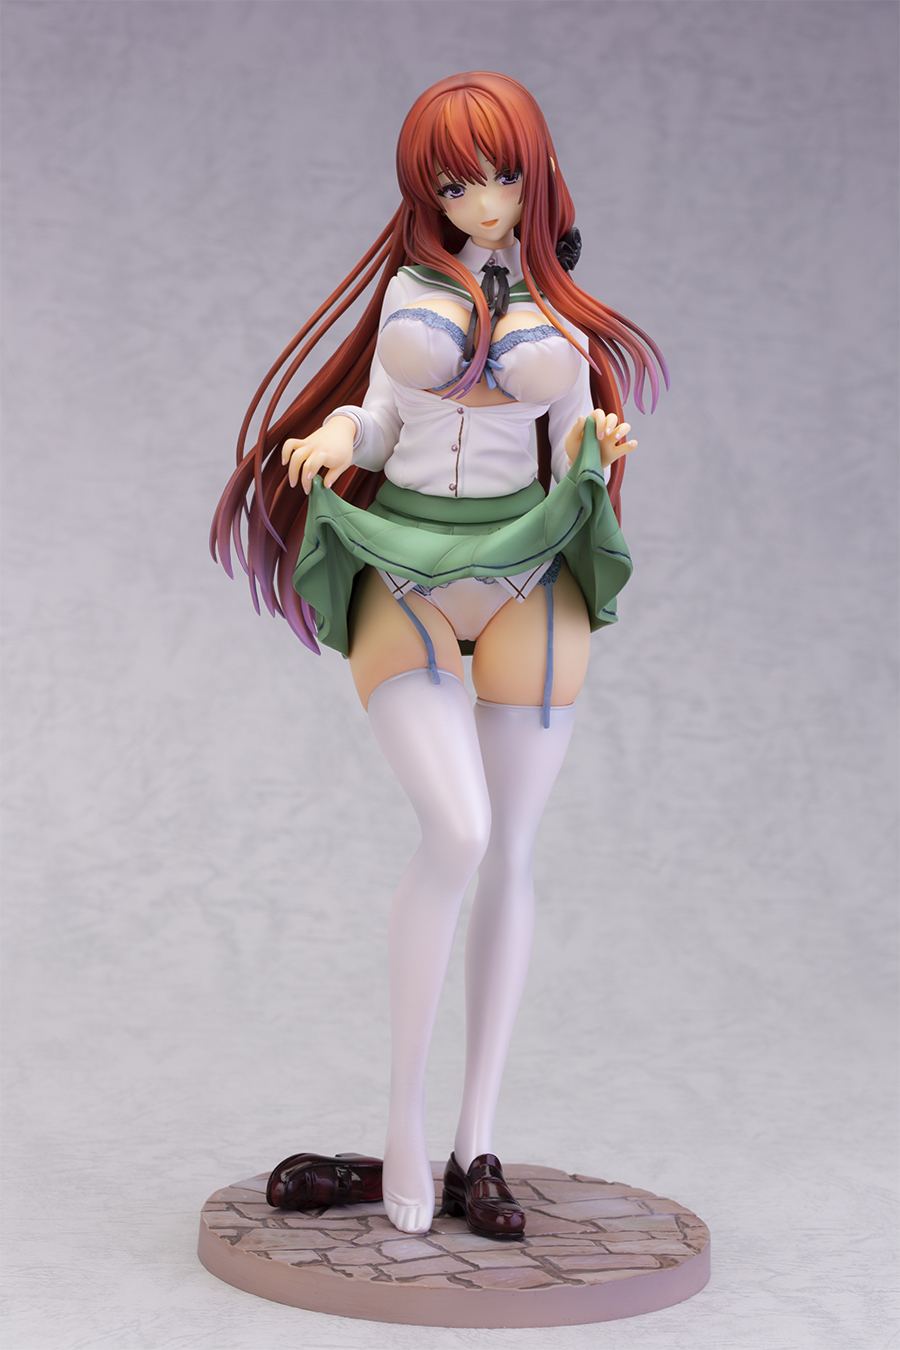 ORIGINAL CHARACTER 1/7 SCALE PRE-PAINTED FIGURE: AYAKA TACHIBANA ANOTHER COLOR VER. ILLUSTRATION BY PIROMIZU Sky Tube